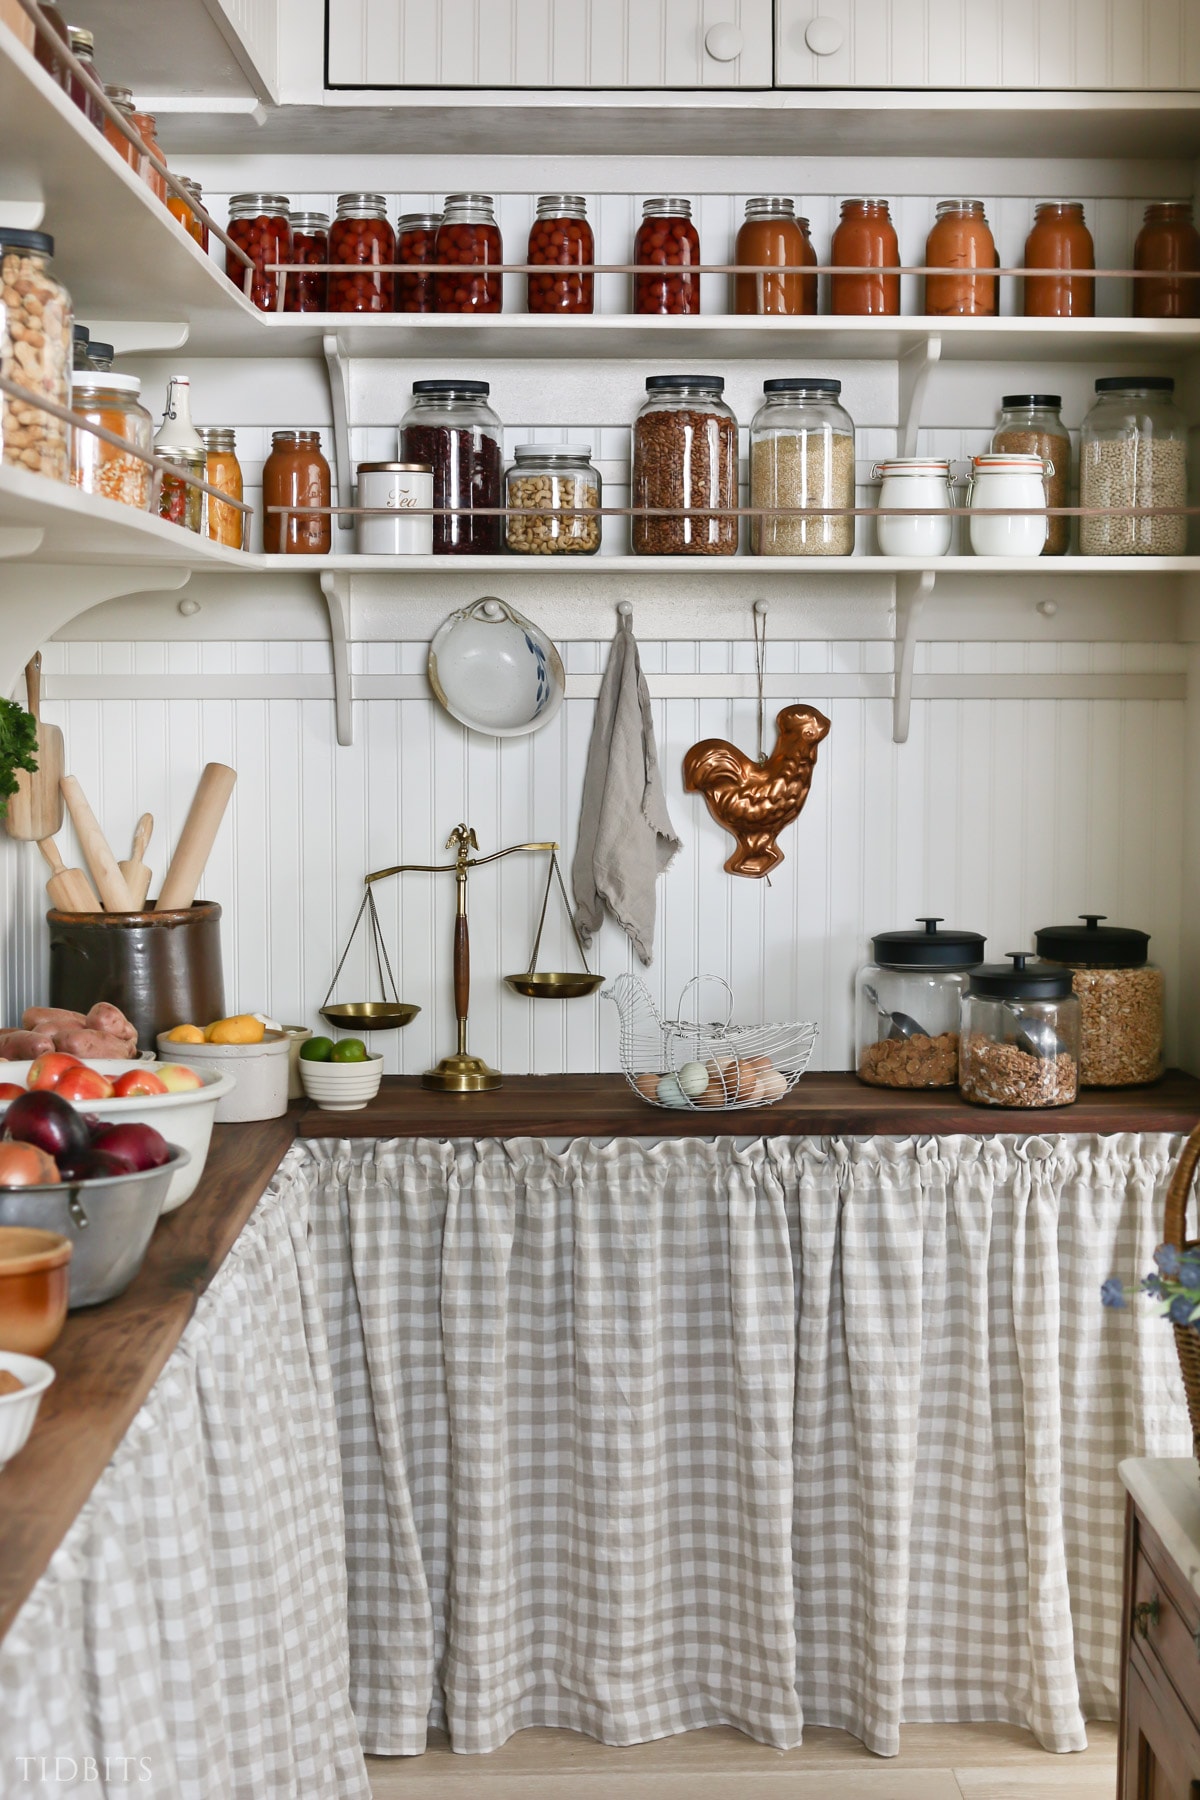 How to Hide Small Kitchen Appliances Without a Butler's Pantry